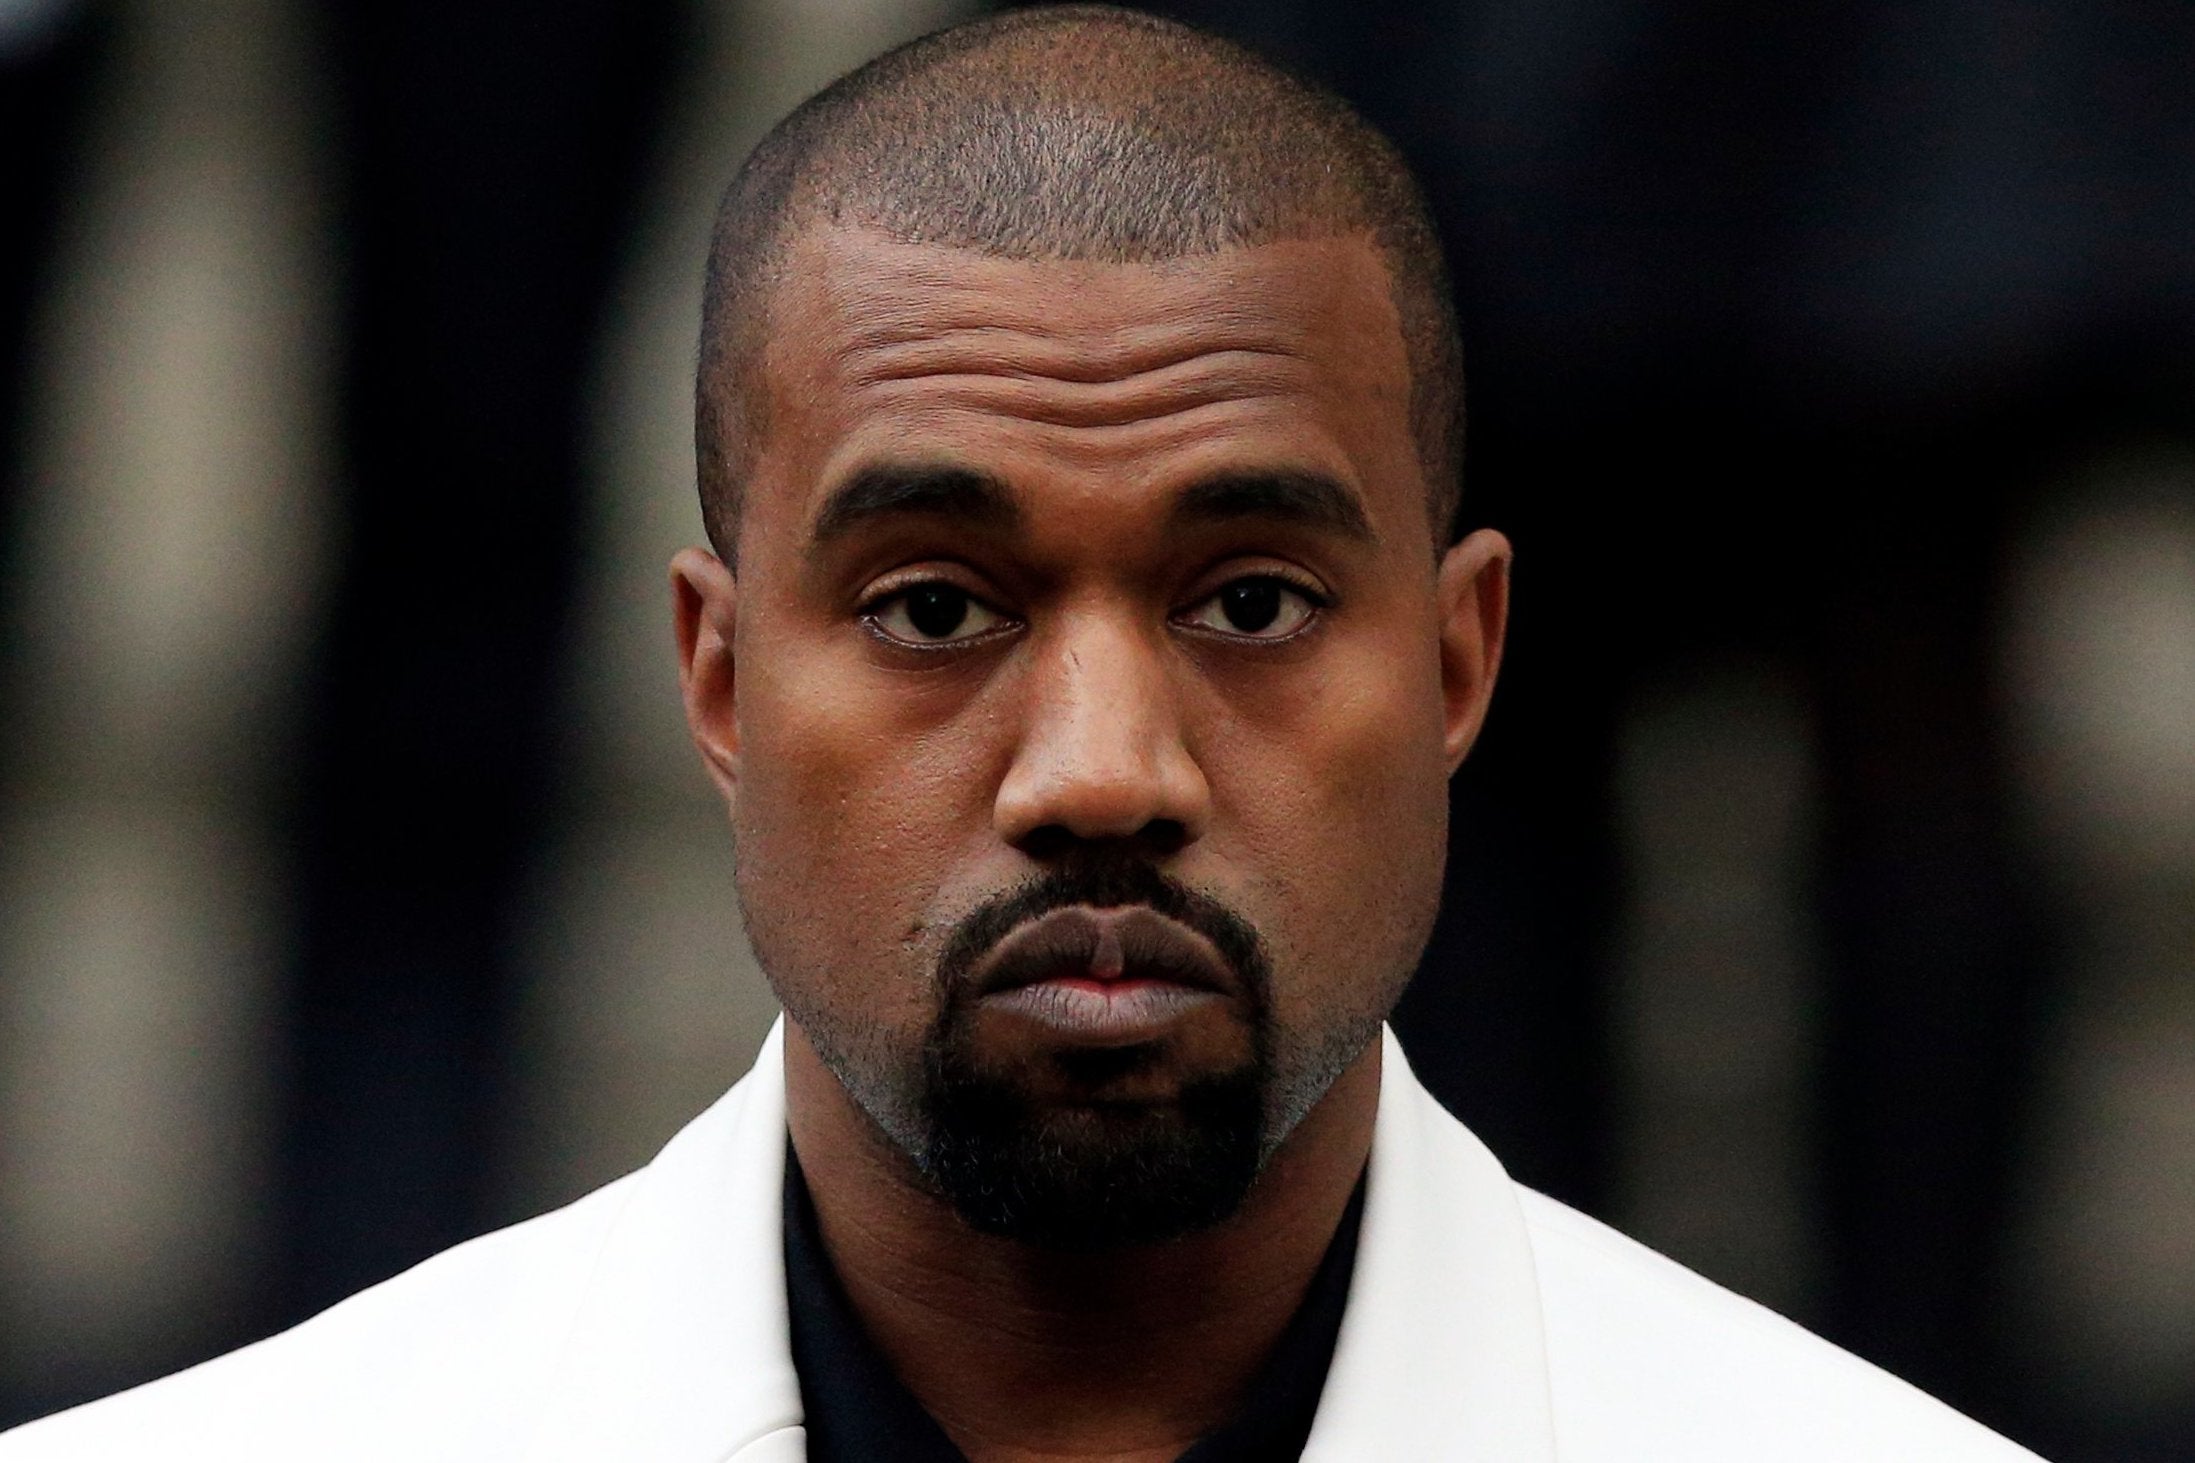 Kanye West New Song With Lil Pump Appears Online After Debuting At The Pornhub Awards The Independent The Independent - kanye roblox song